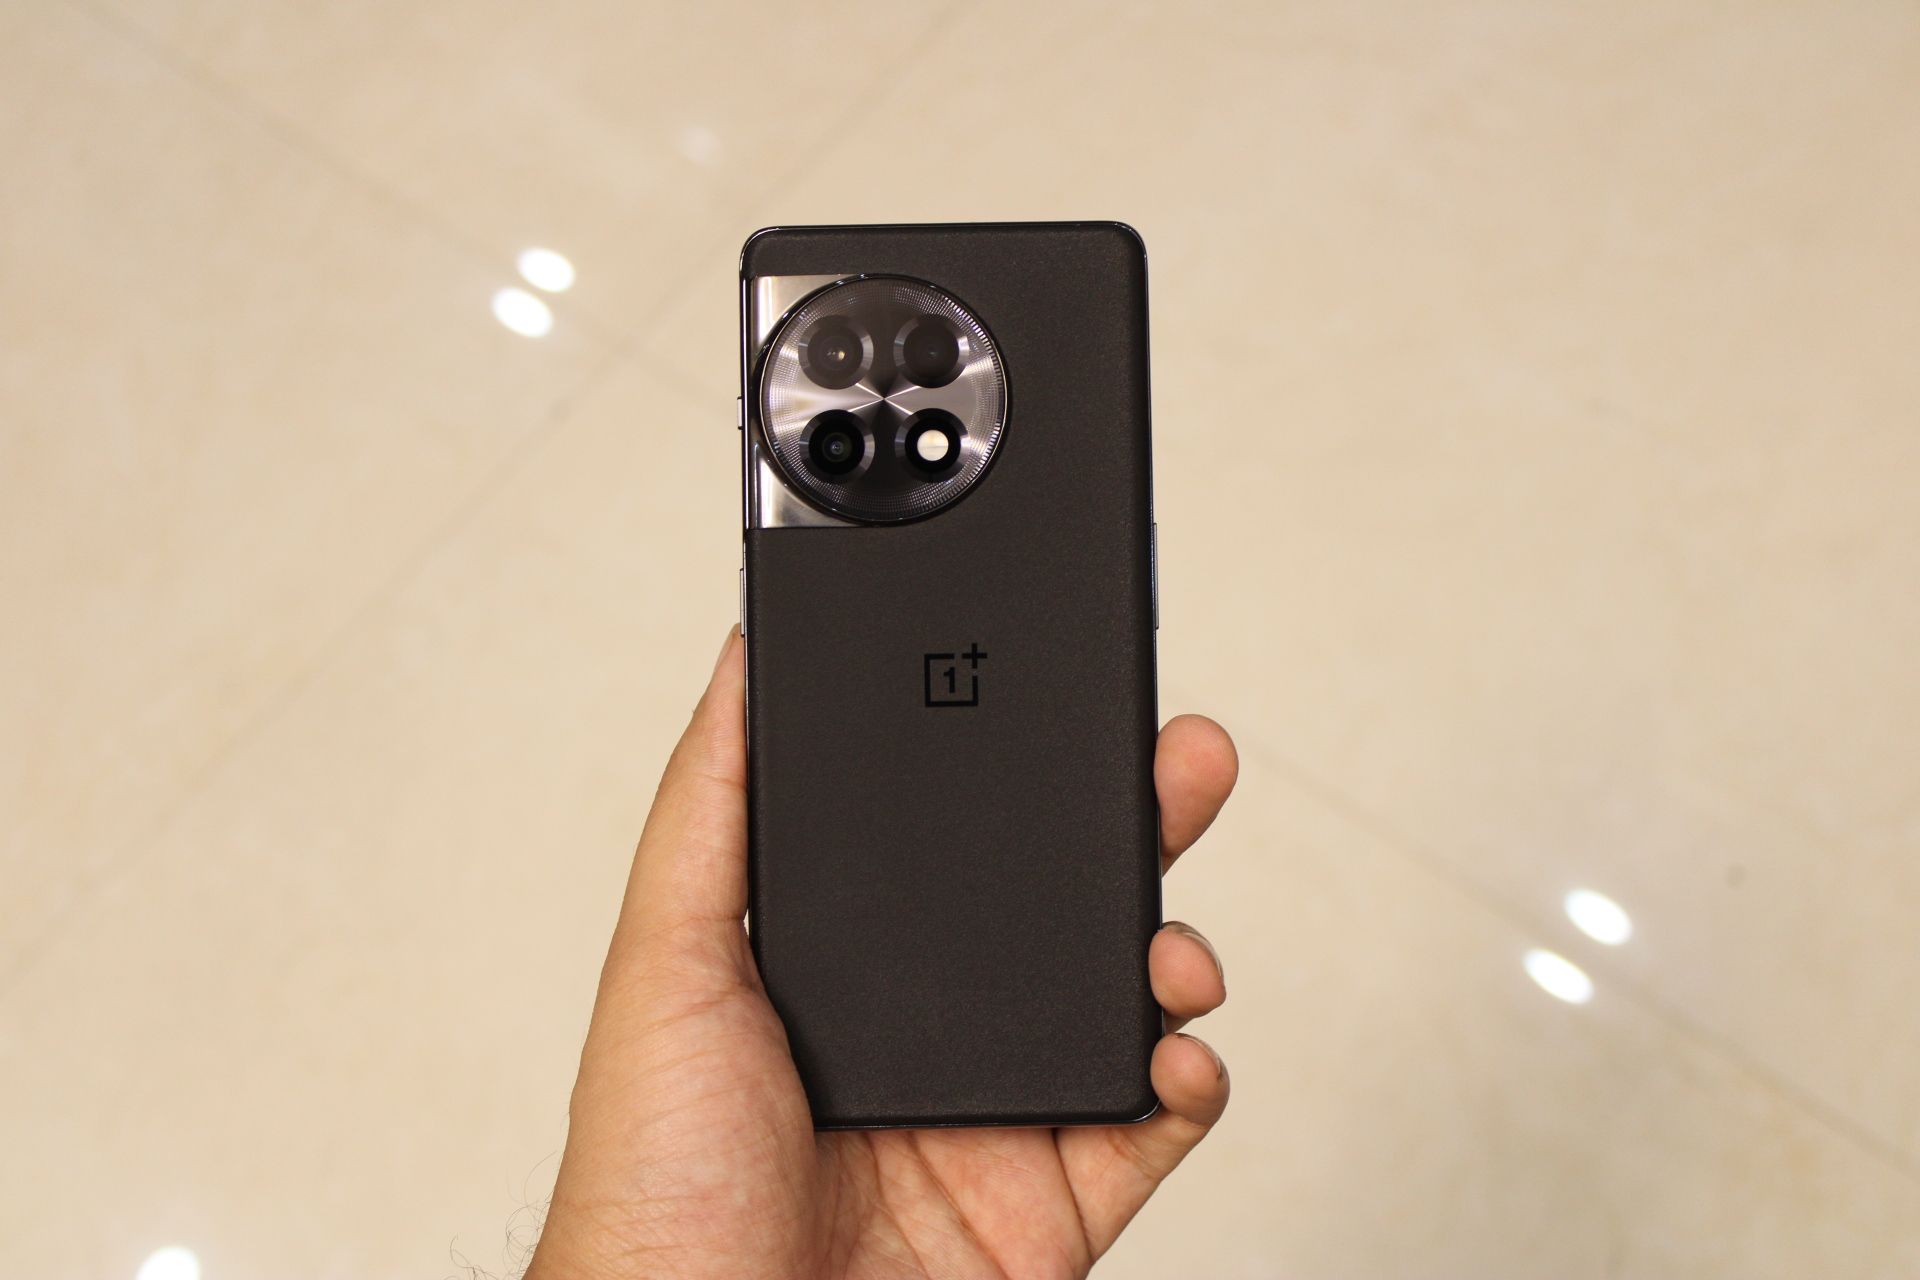 OnePlus 11 India launch event: time, price, specs, and more